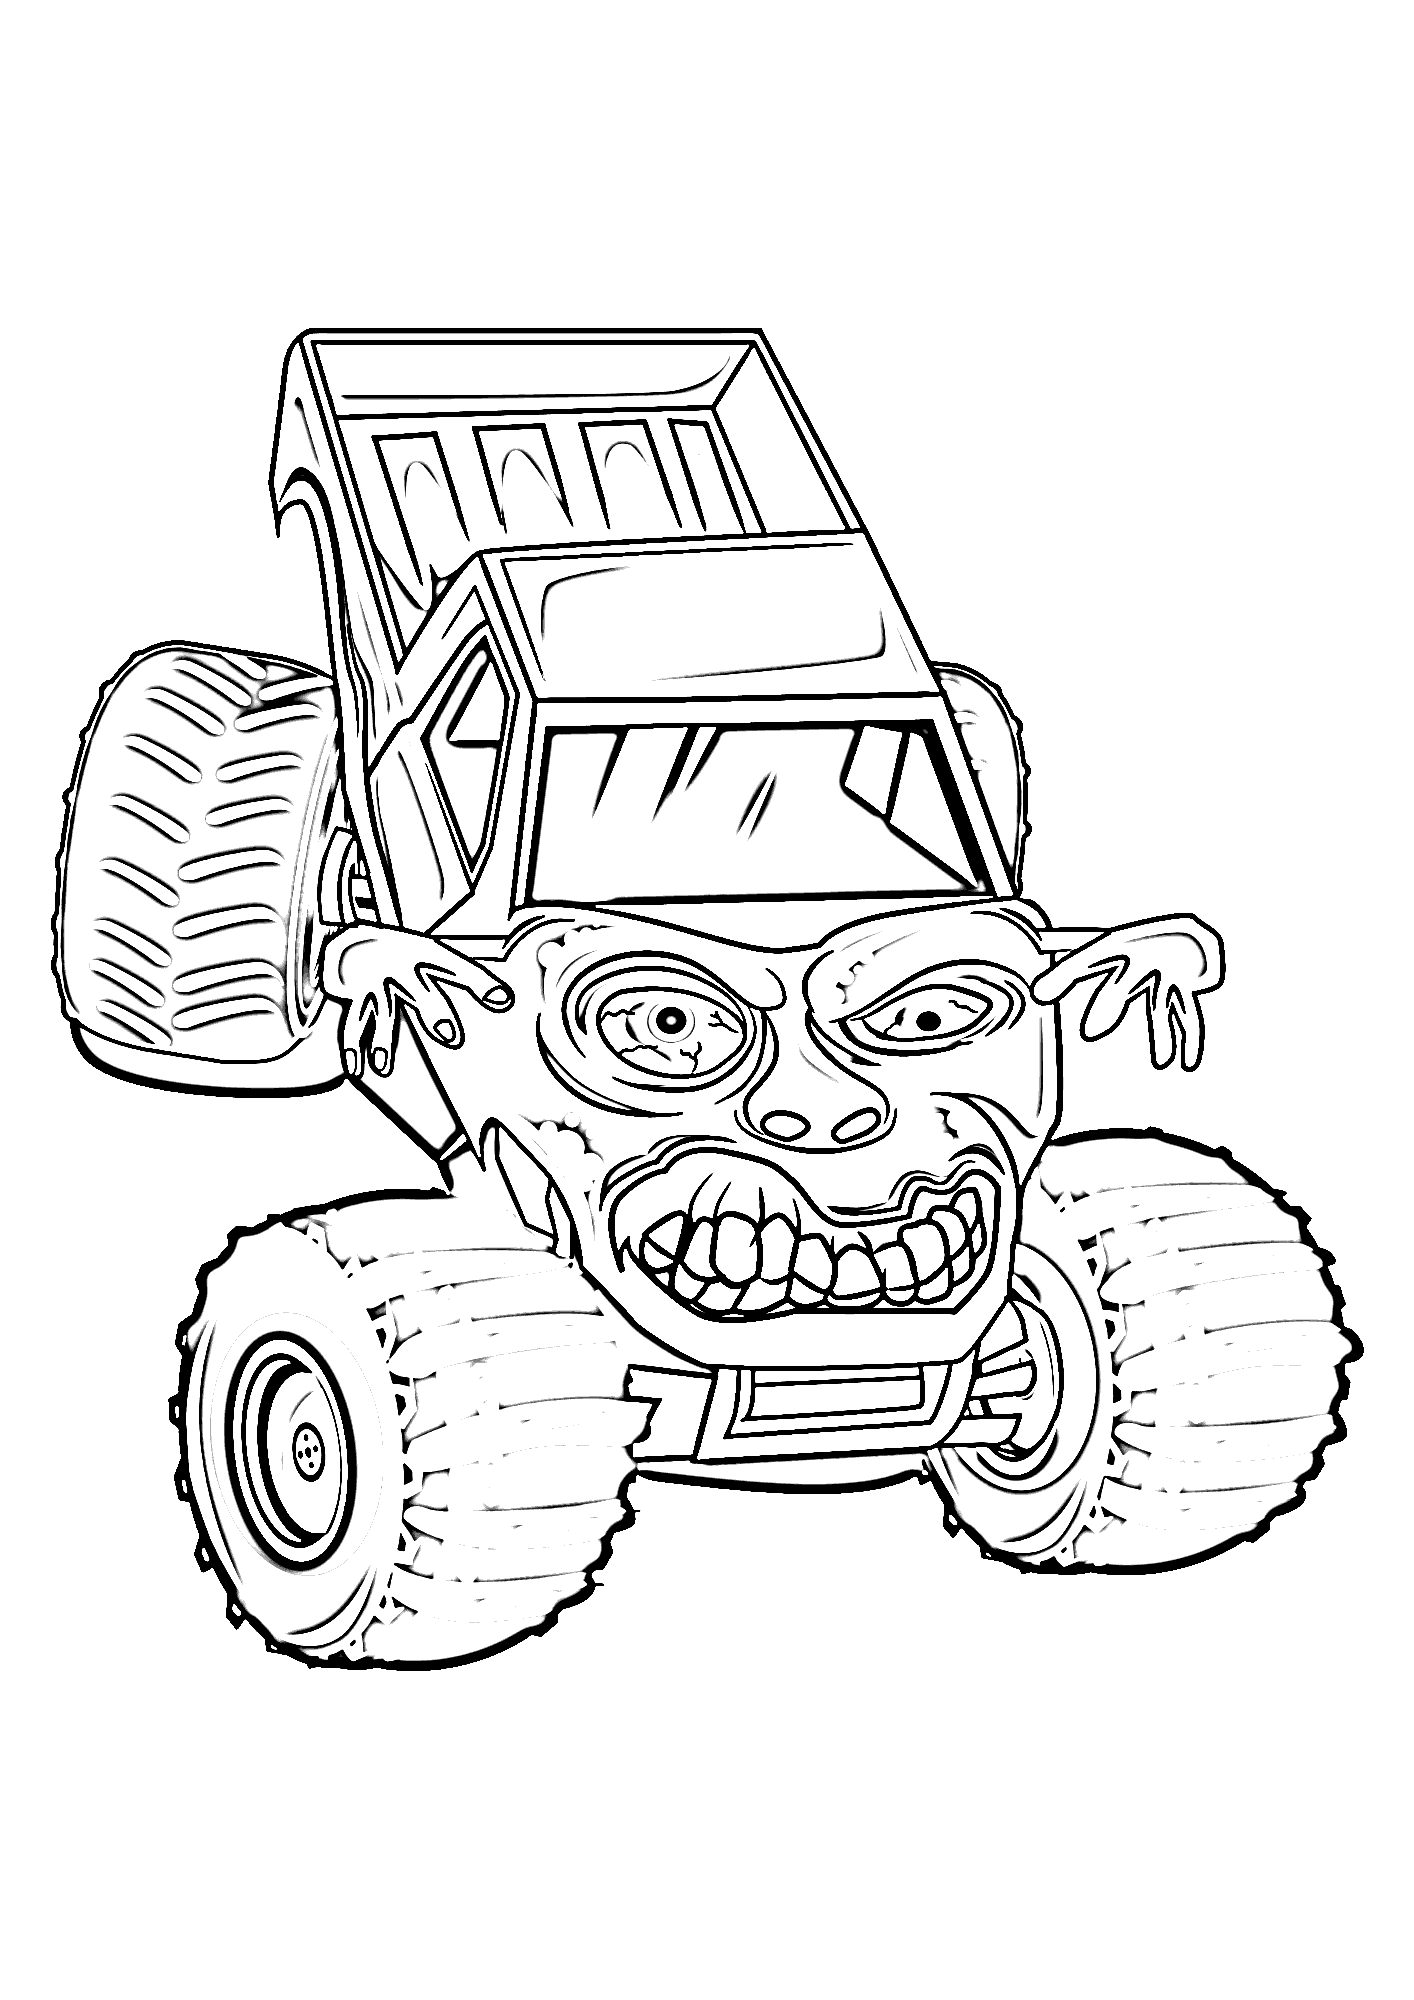 Truck for Children Coloring Pages